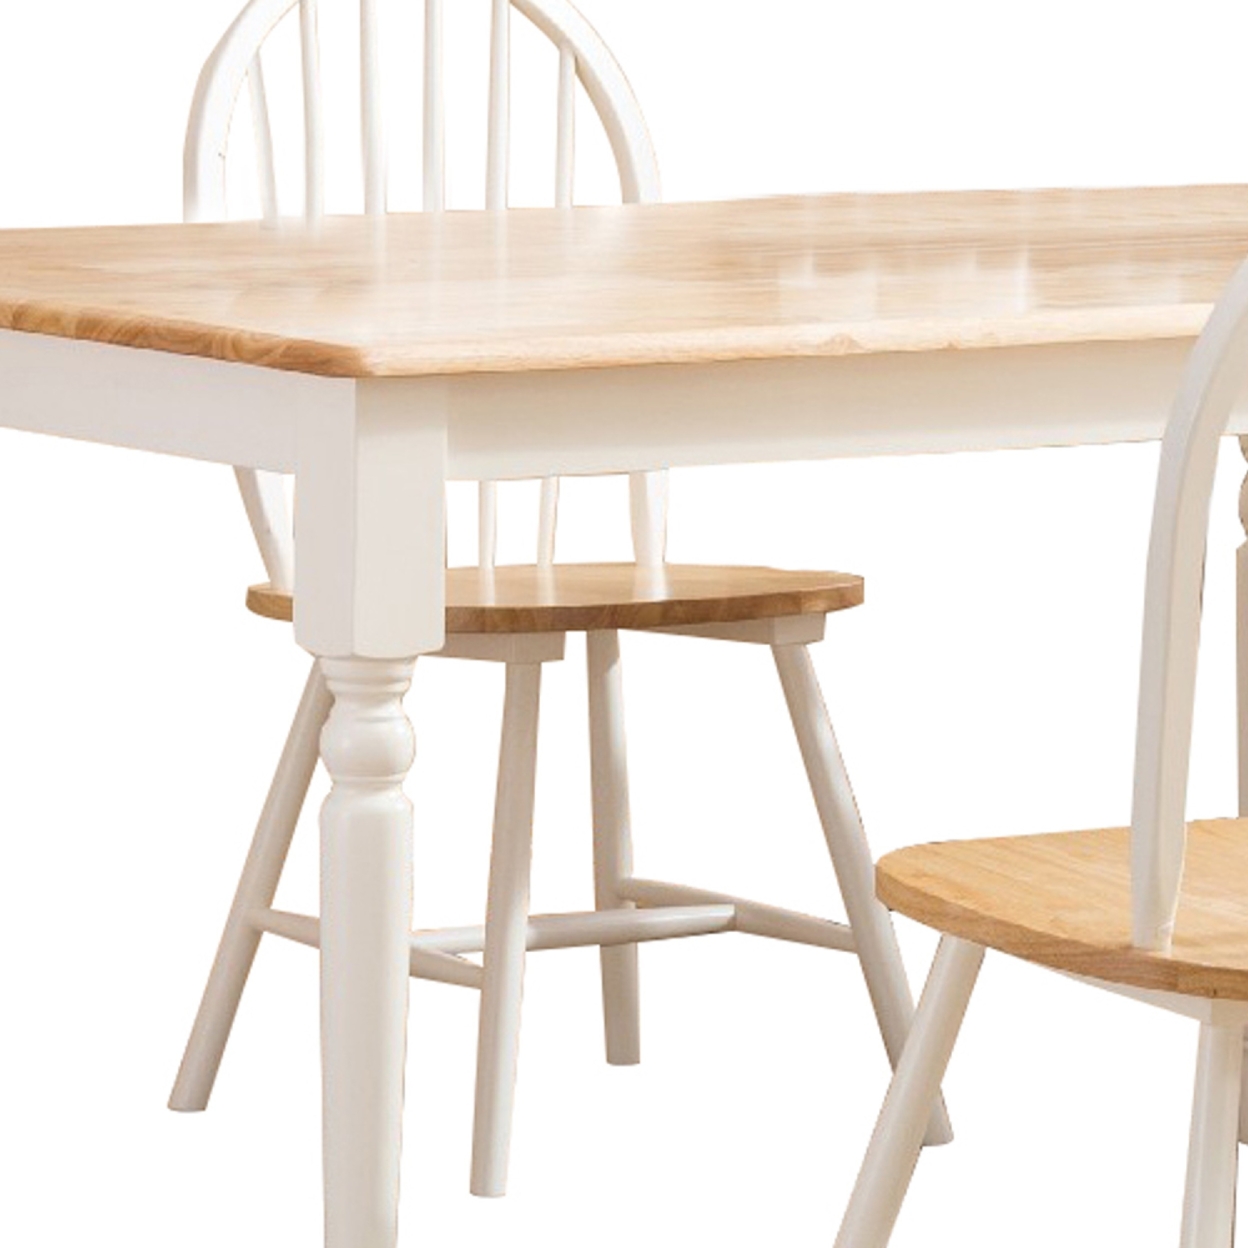 5 Piece Cottage Style Dining Table Set, 4 Windsor Back Chairs, White, Brown- Saltoro Sherpi